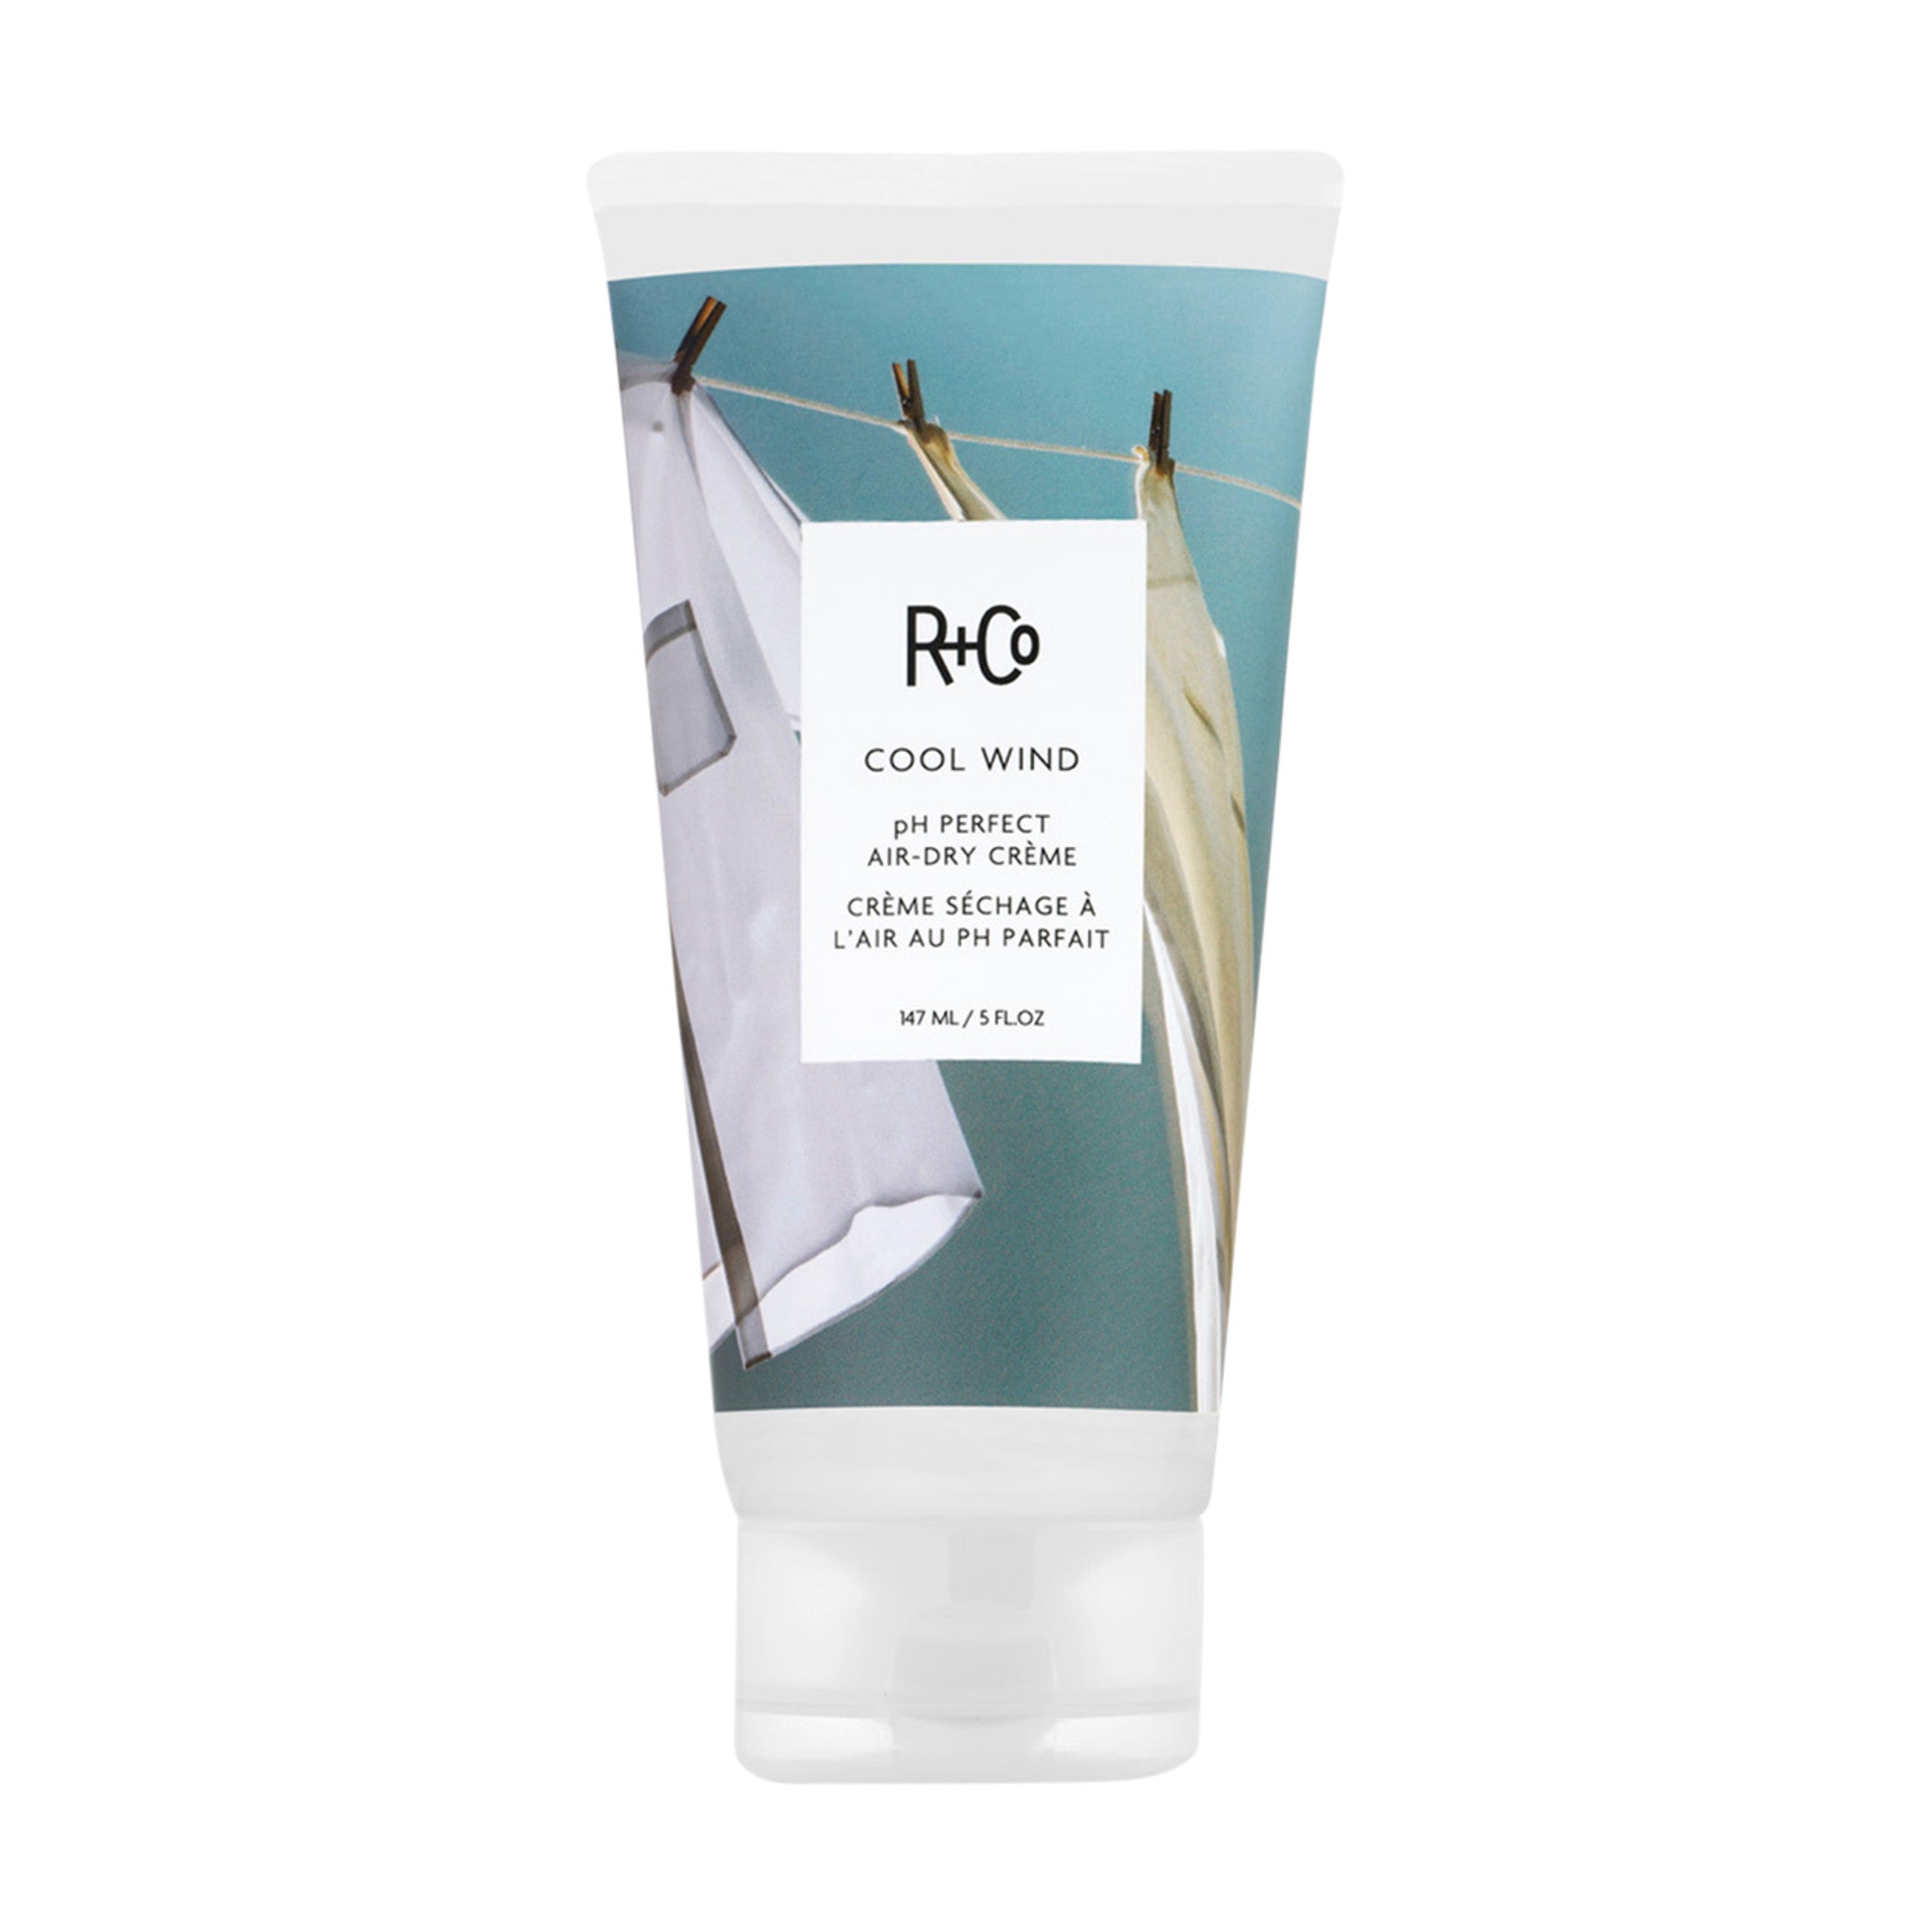 R+Co Cool Wind pH Perfect Air Dry Creme main image.